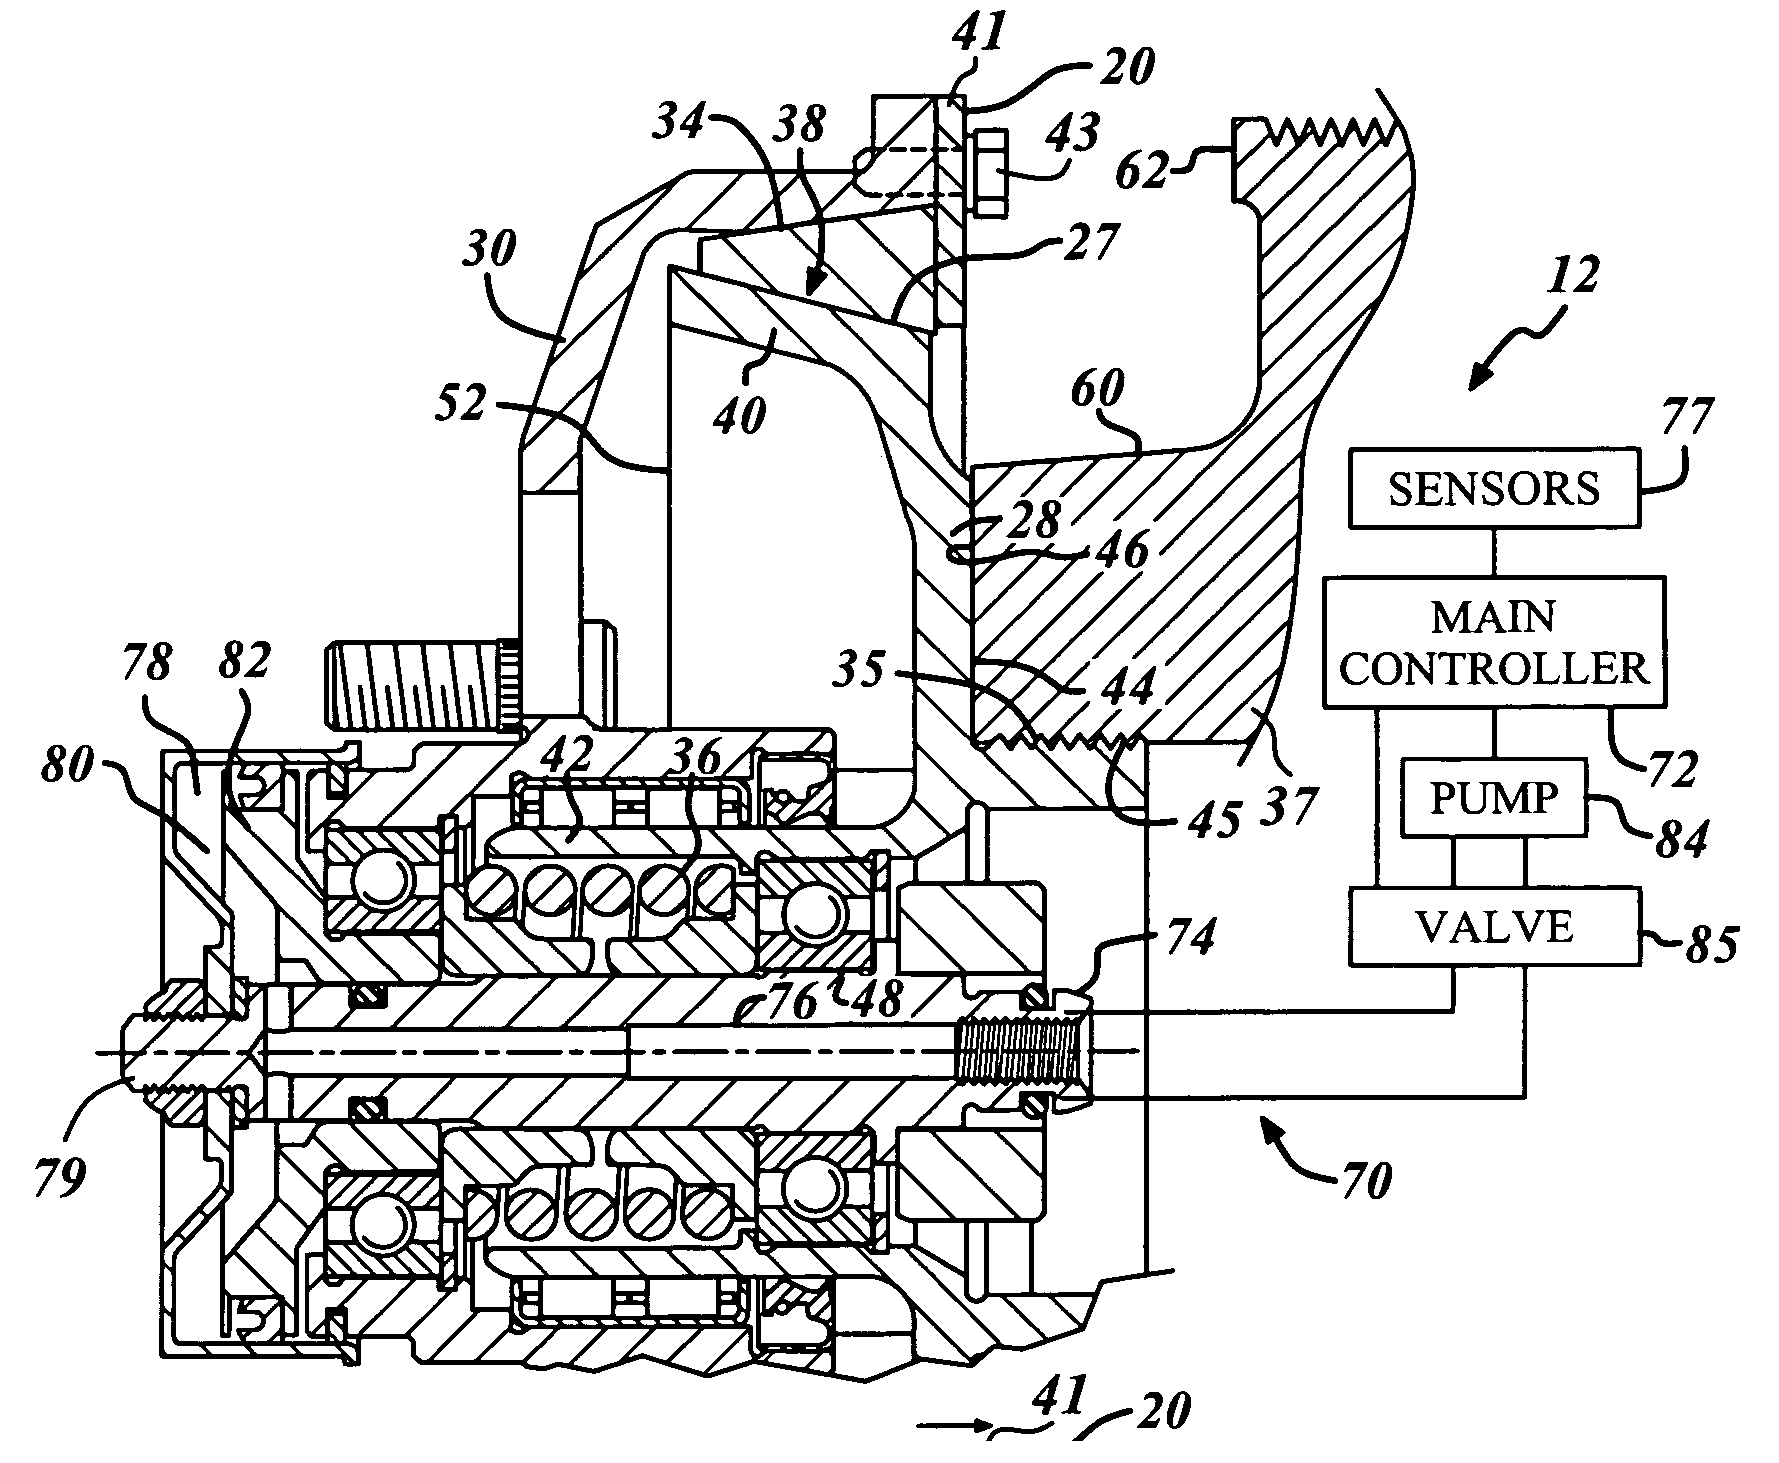 Pneumatic cone clutch fan drive having threaded attachment method for drive shaft of clutch to hub mounting